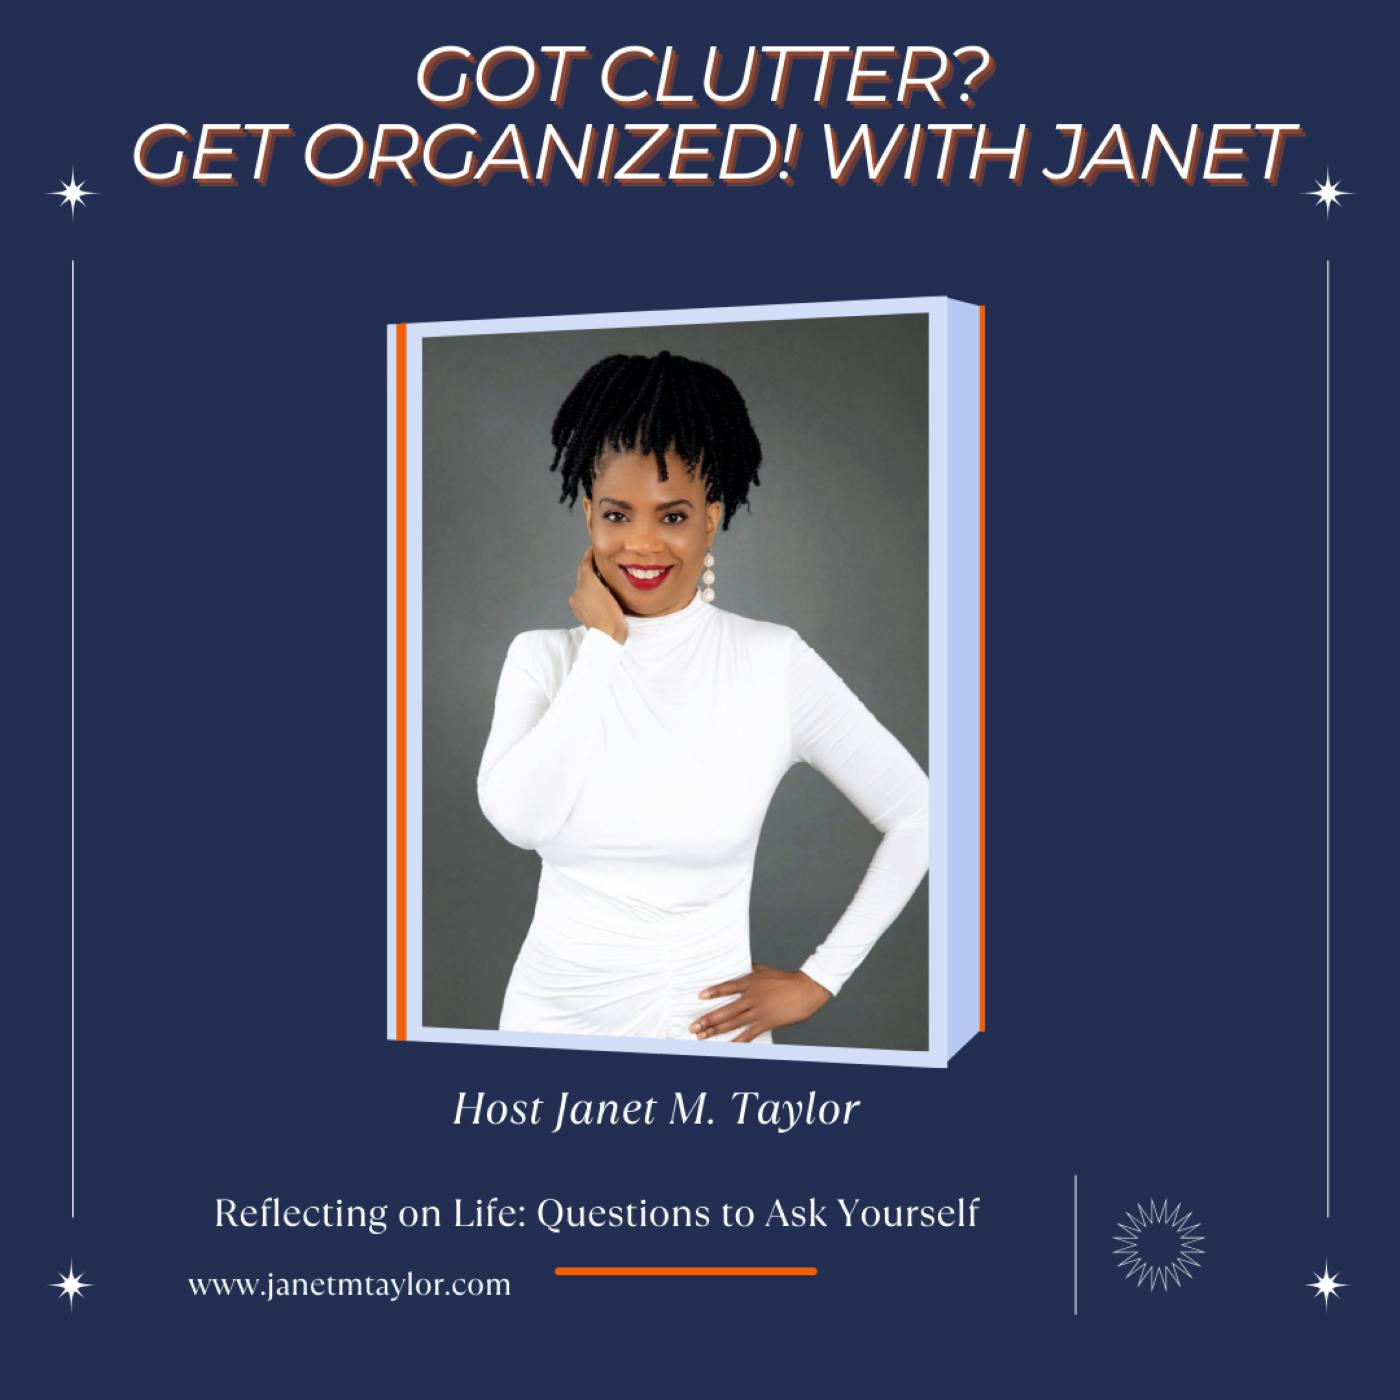 Reflecting on Life: Questions to Ask Yourself with Janet